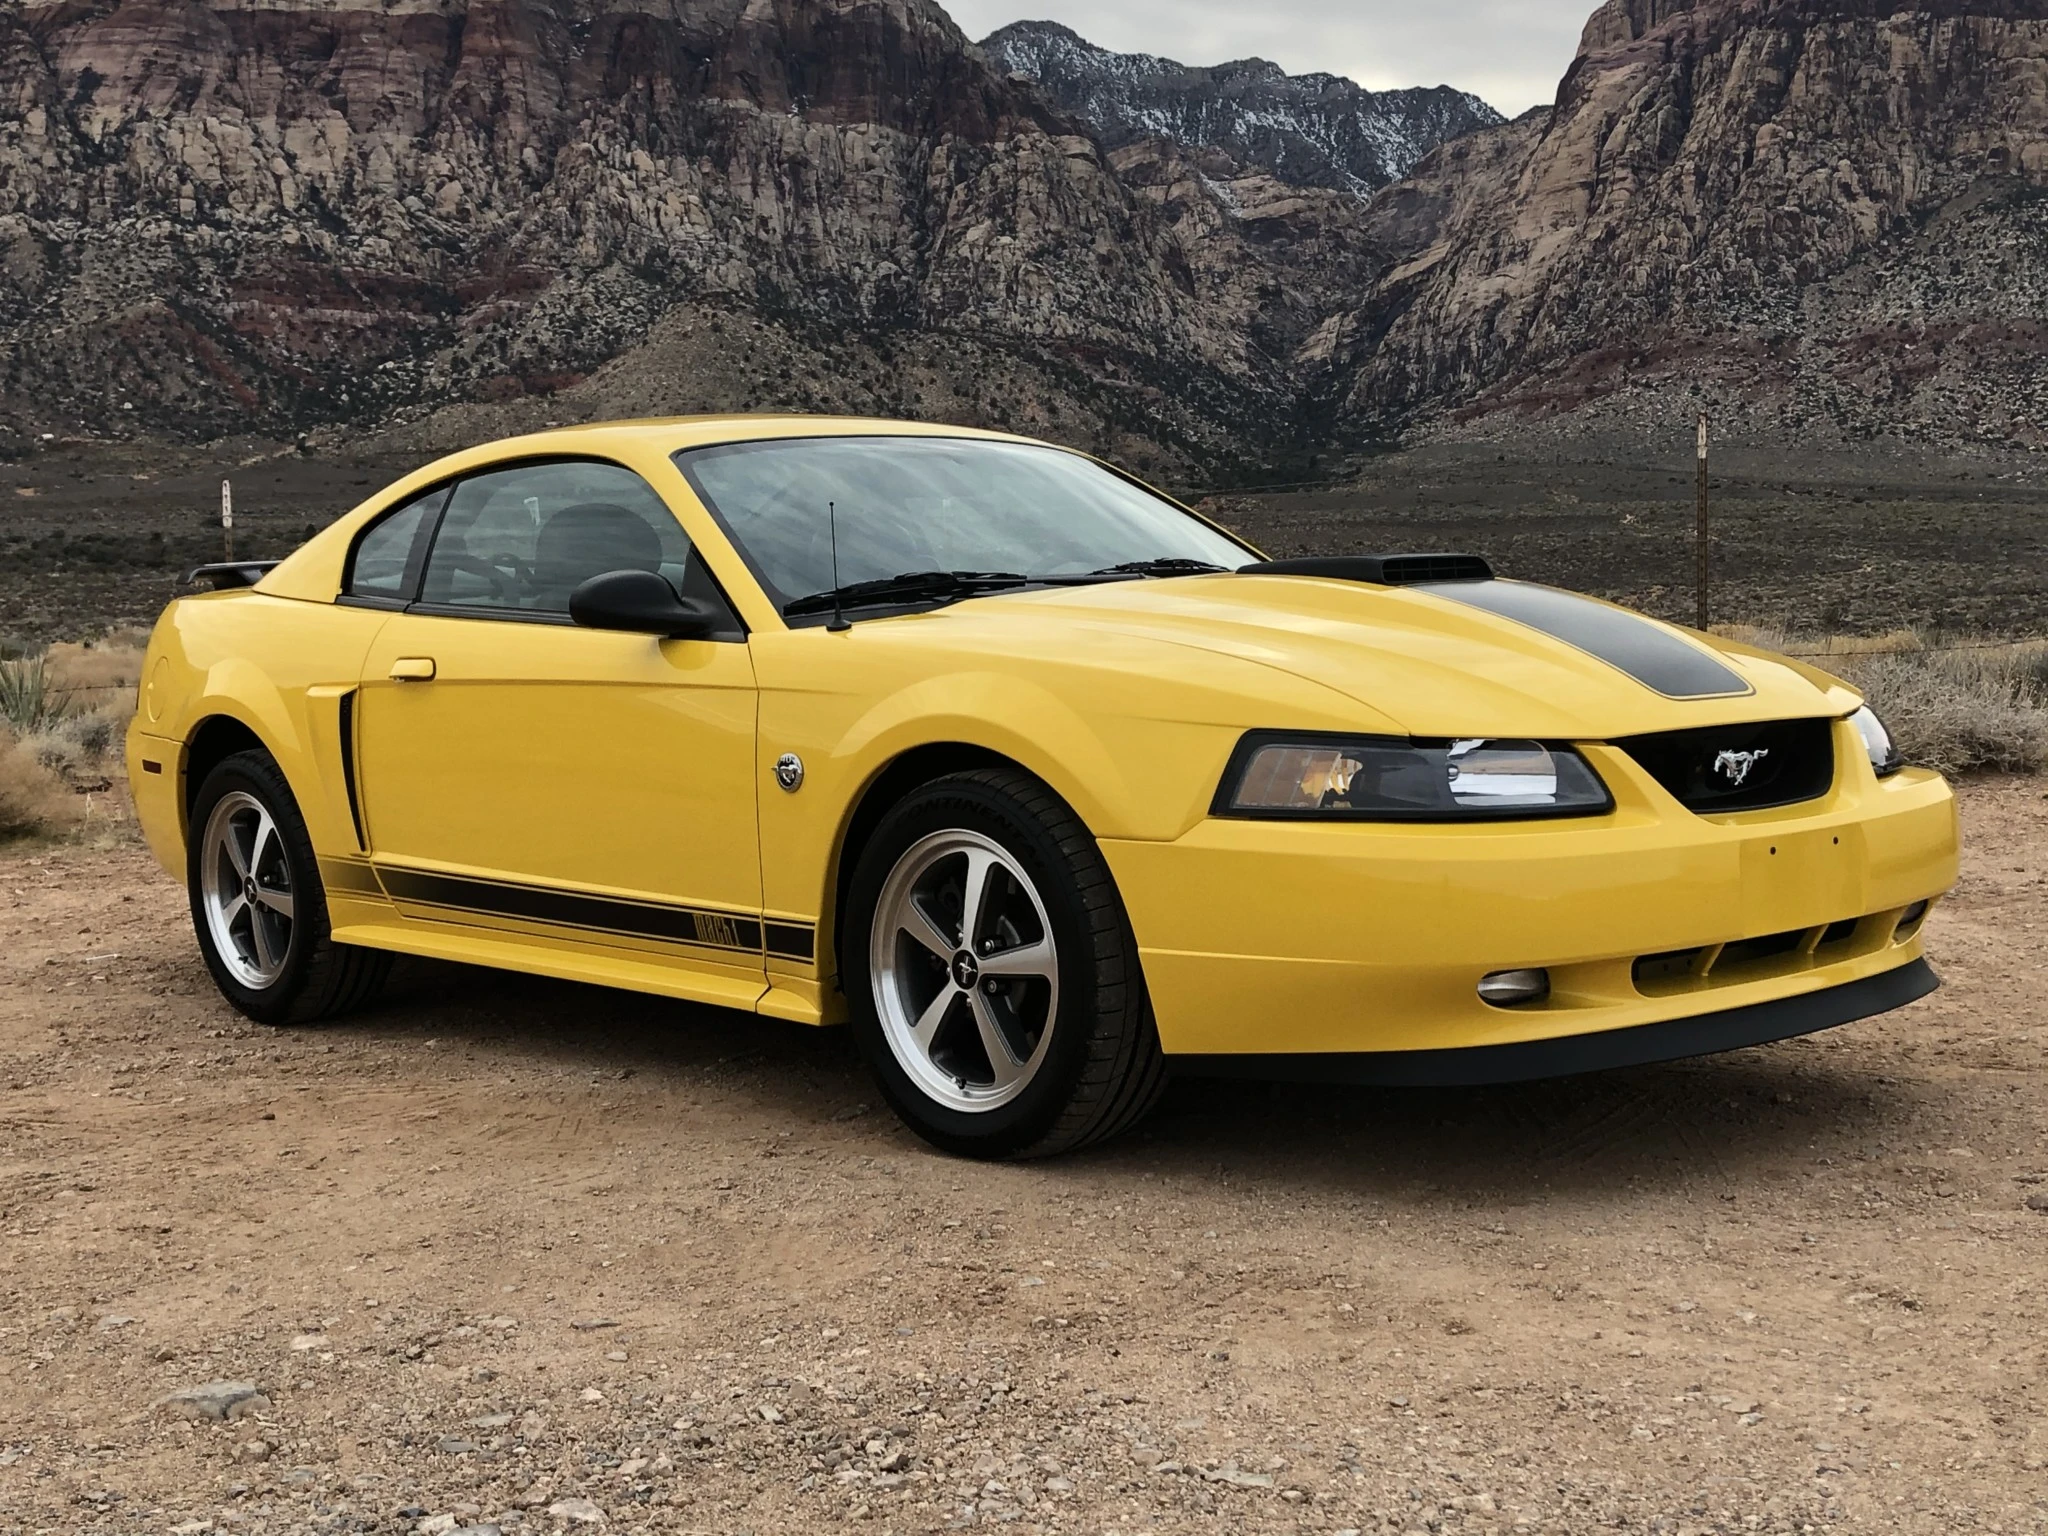 Mustang Of The Day: 2004 Ford Mustang Mach 1